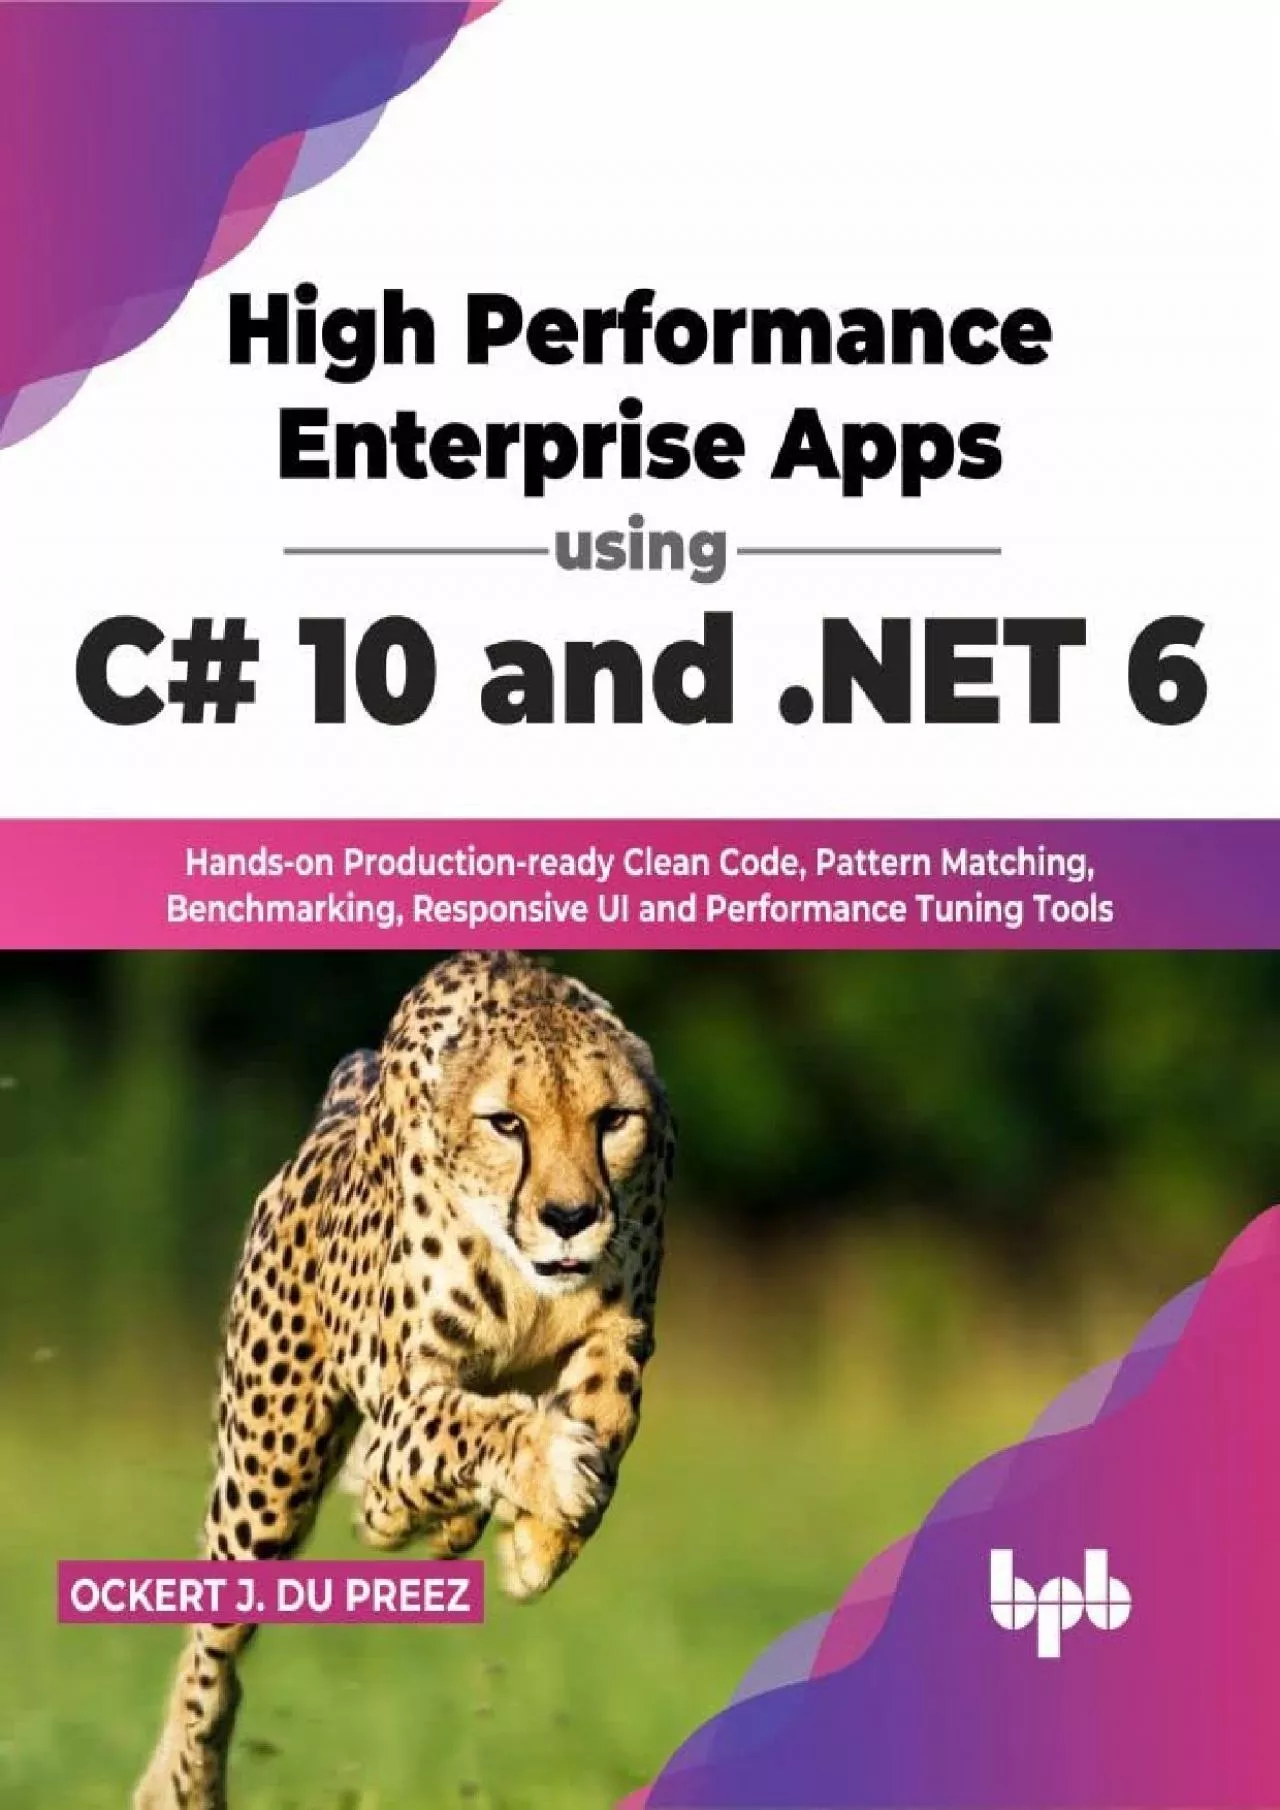 [FREE]-High Performance Enterprise Apps using C 10 and .NET 6: Hands-on Production-ready